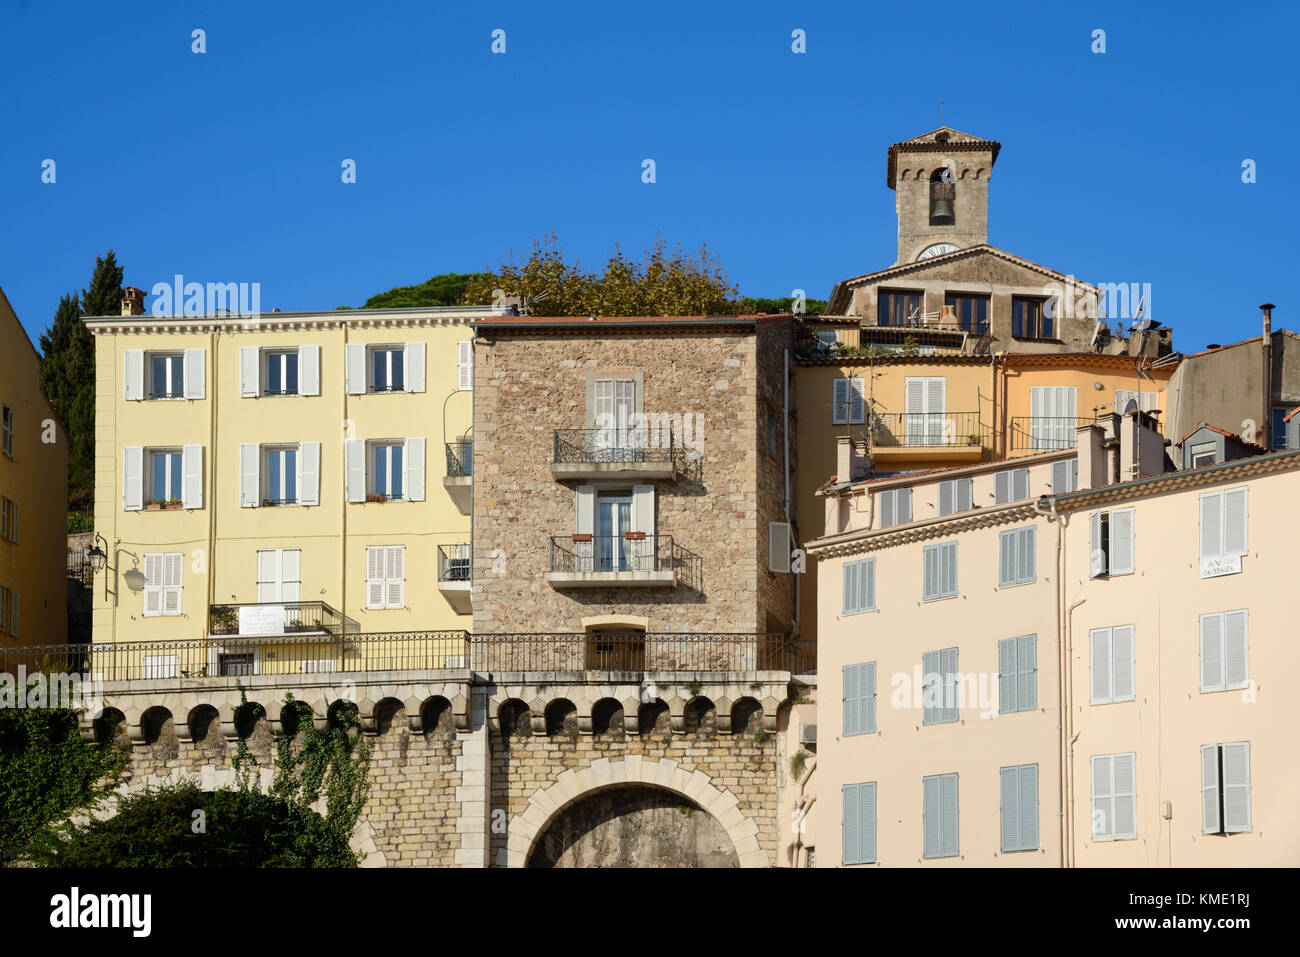 View of Le Suquet Old Town, and Belfry or Clock Tower of the Church Notre-Dame d'Esperance, Cannes, France Stock Photo